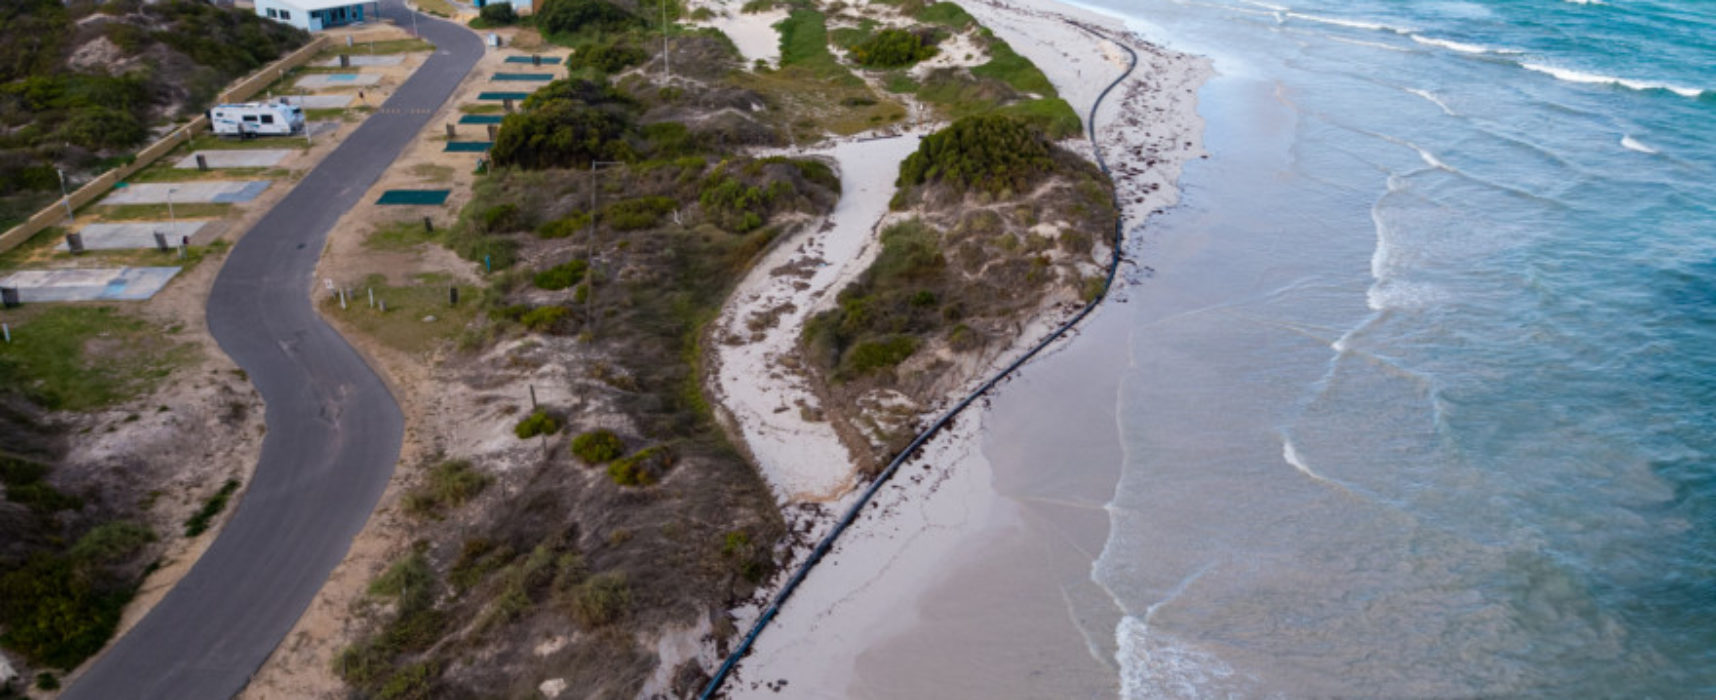 NO MORE VEHICULAR ACCESS TO EDWARDS ISLAND POINT